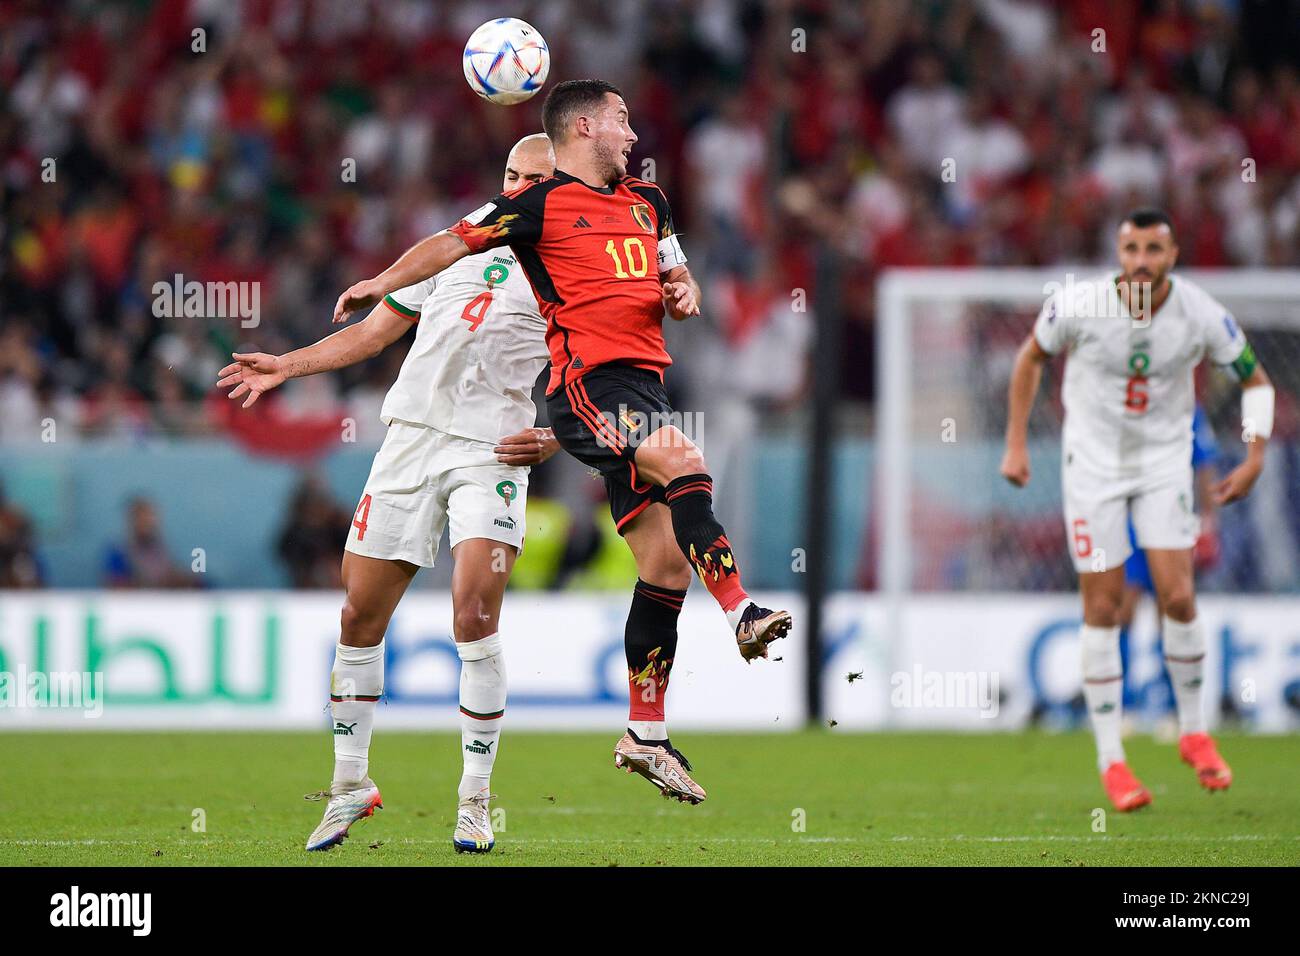 DOHA, QATAR - NOVEMBER 27: Sofyan Amrabat of Morocco battles for the ball with Eden Hazard of Belgium during the Group F - FIFA World Cup Qatar 2022 match between Belgium and Morocco at the Al Thumama Stadium on November 27, 2022 in Doha, Qatar (Photo by Pablo Morano/BSR Agency) Stock Photo